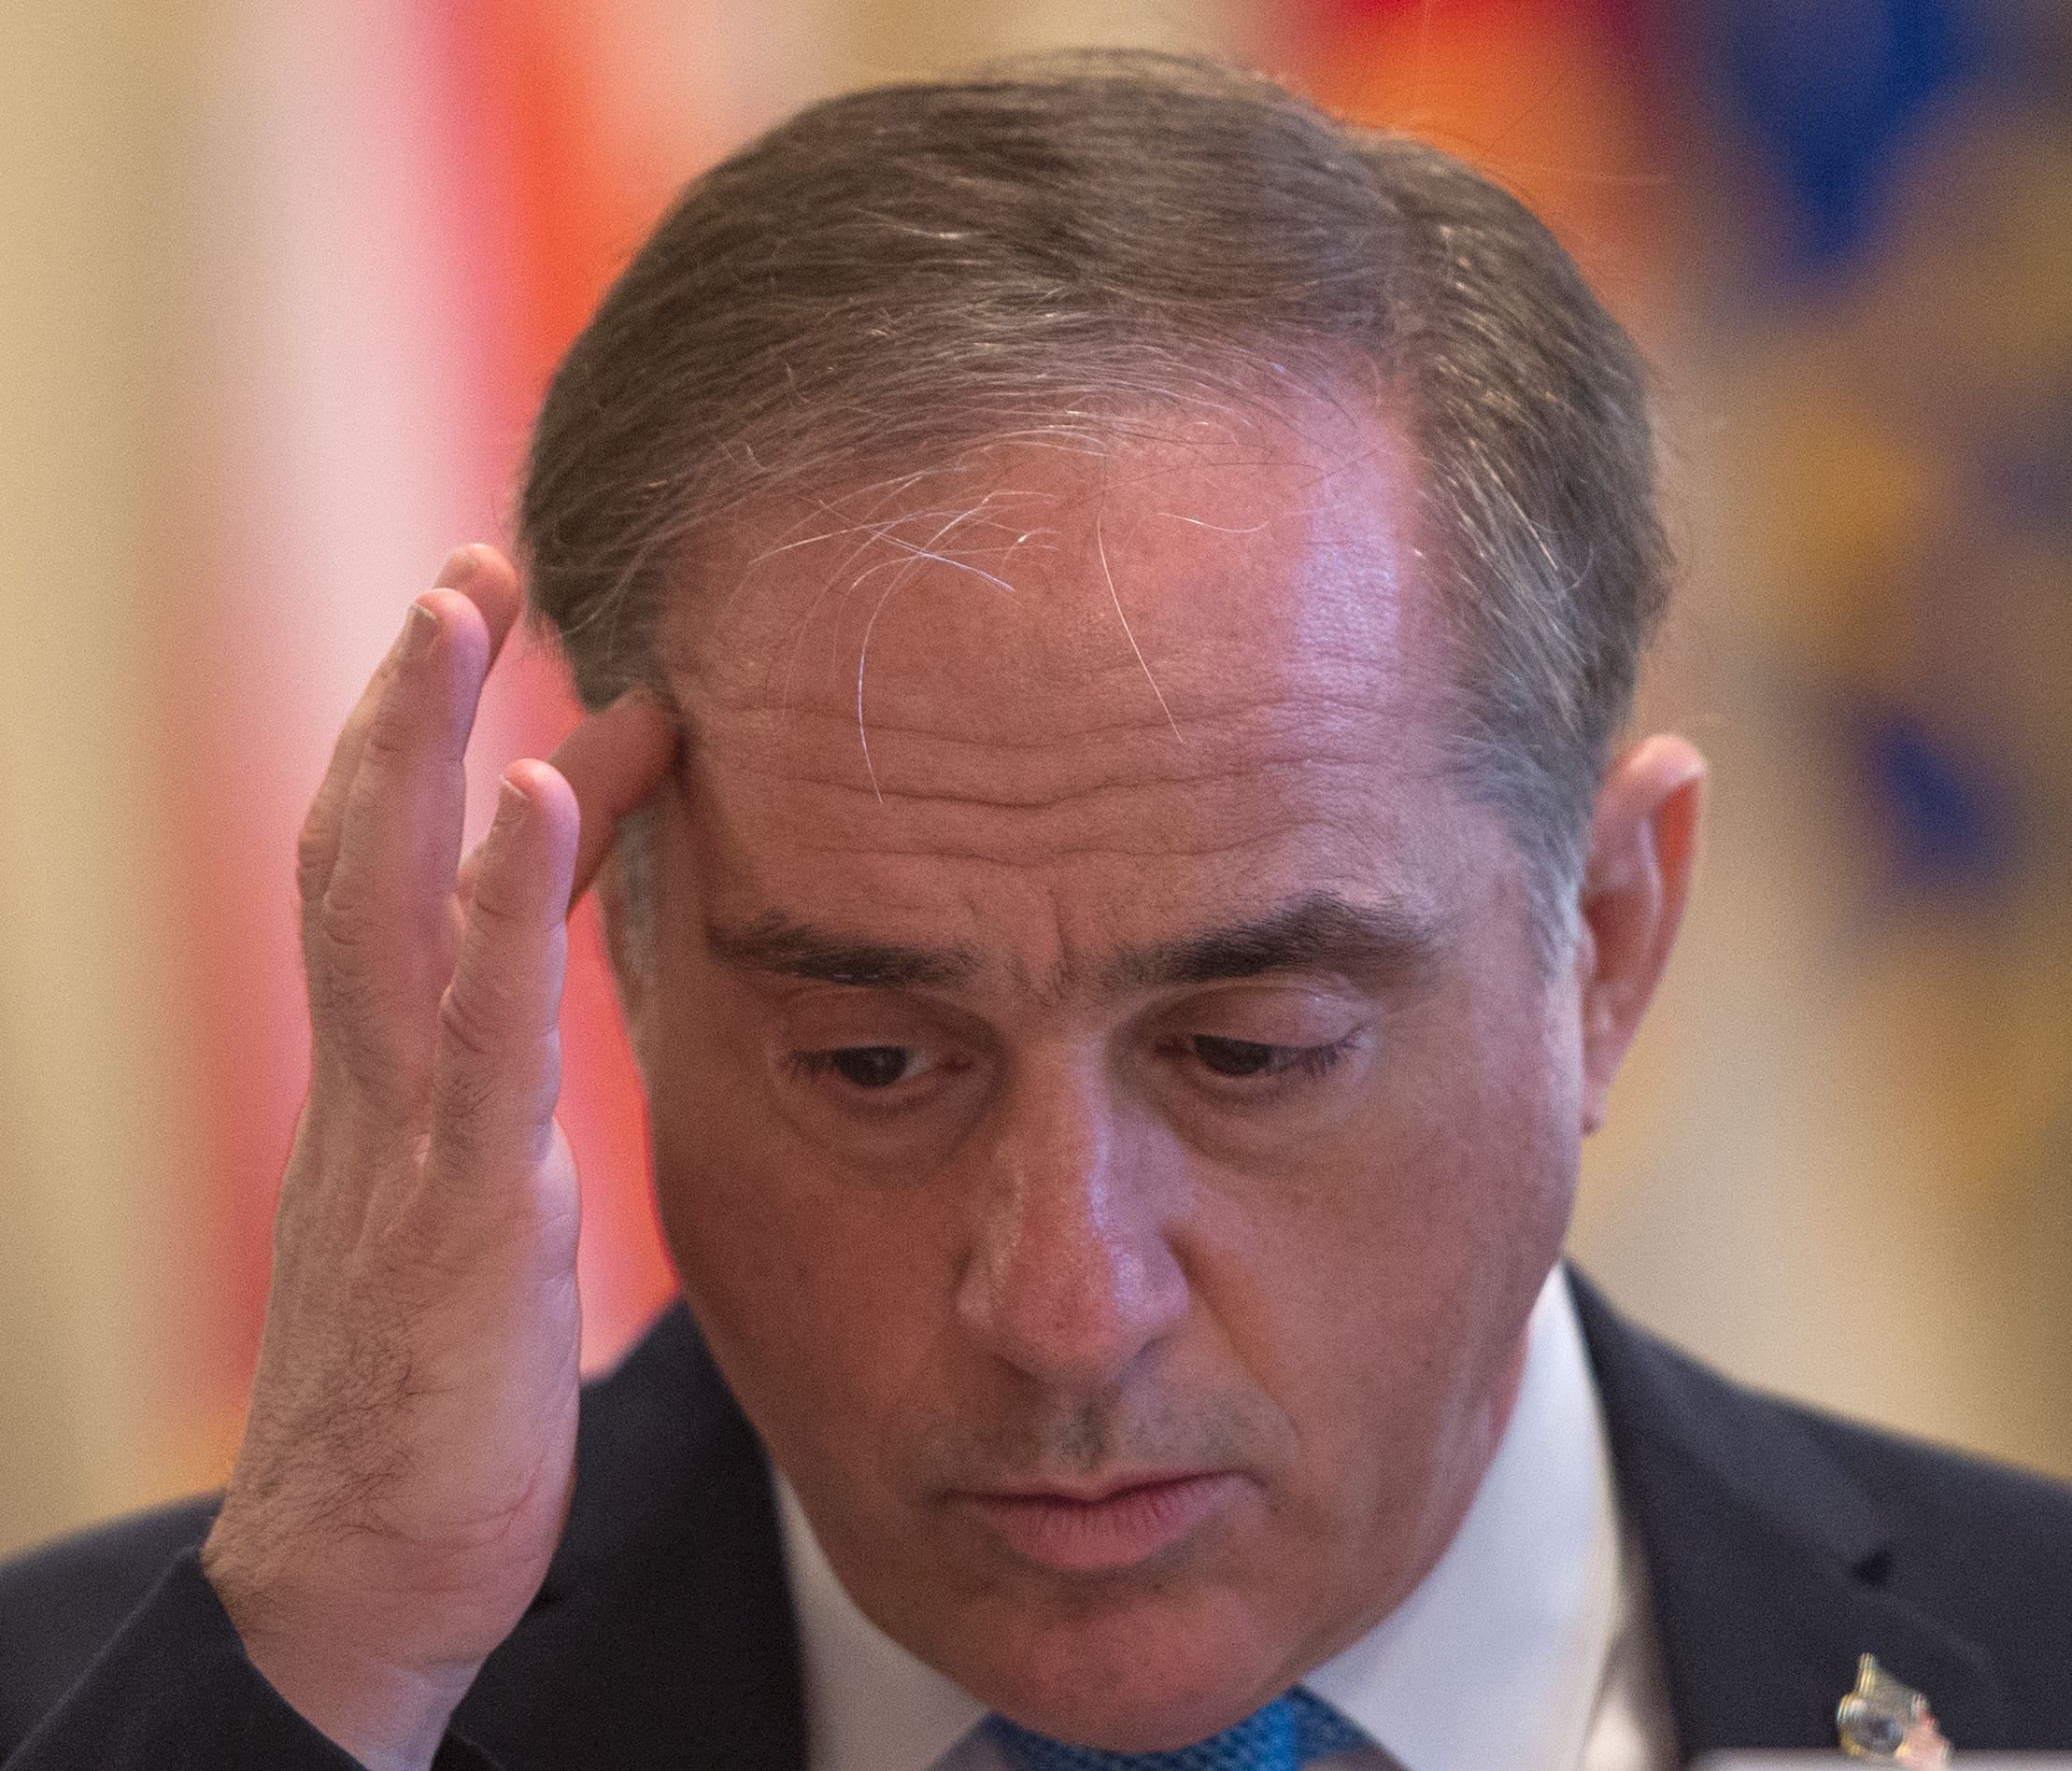 US Secretary of Veterans Affairs David Shulkin looks on before testifying at a House Veteran's Affairs Committee hearing on May 24, 2017.